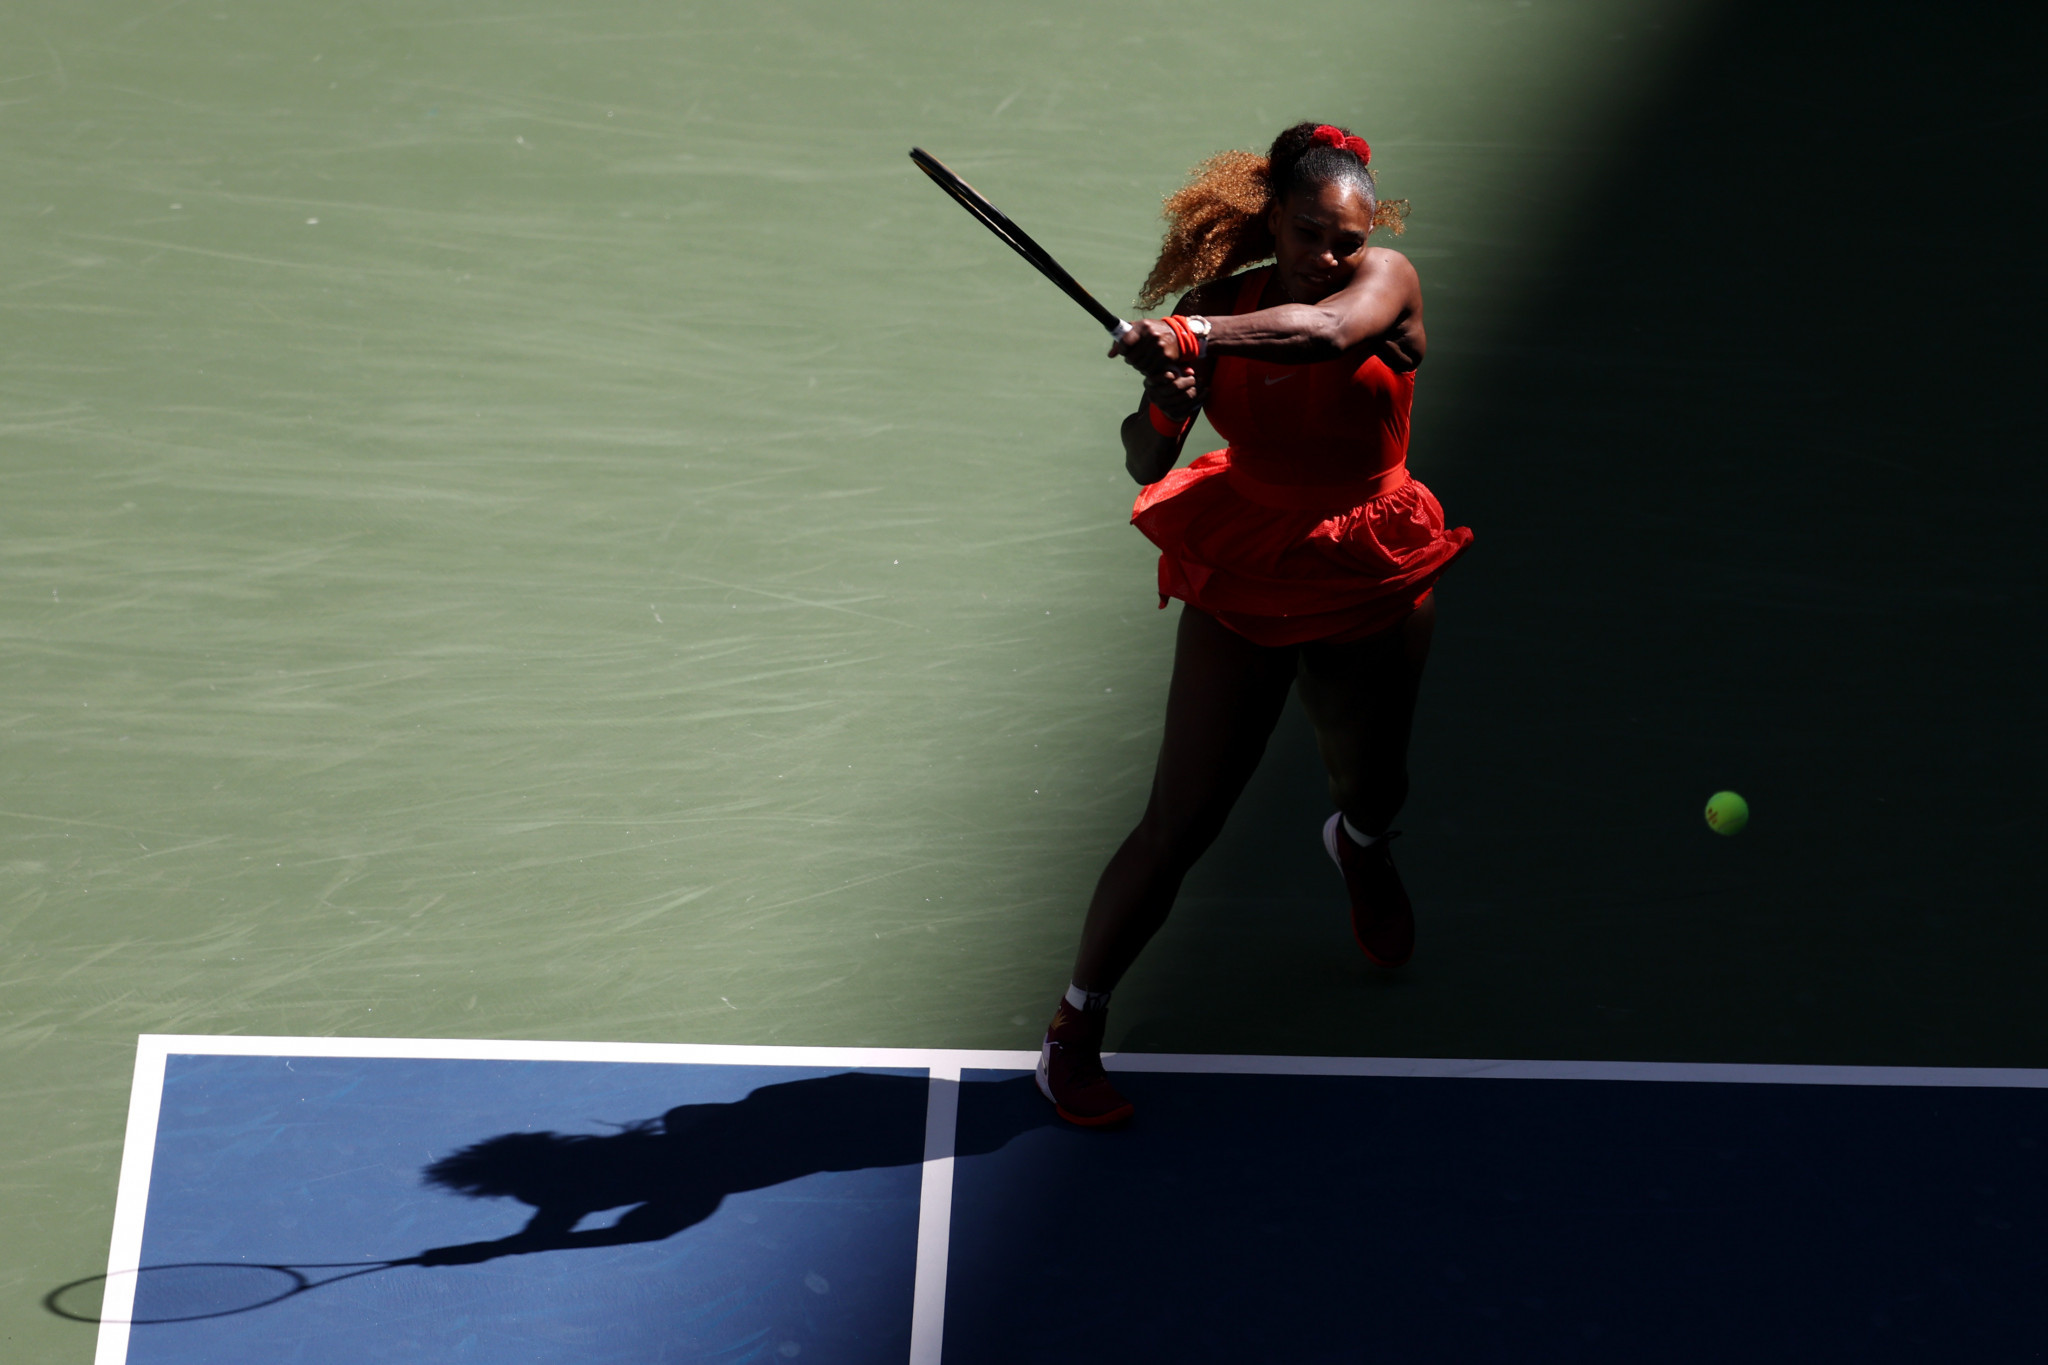 Serena Williams made a slow before overwhelming her rival to win 2-6, 6-2, 6-2 ©Getty Images